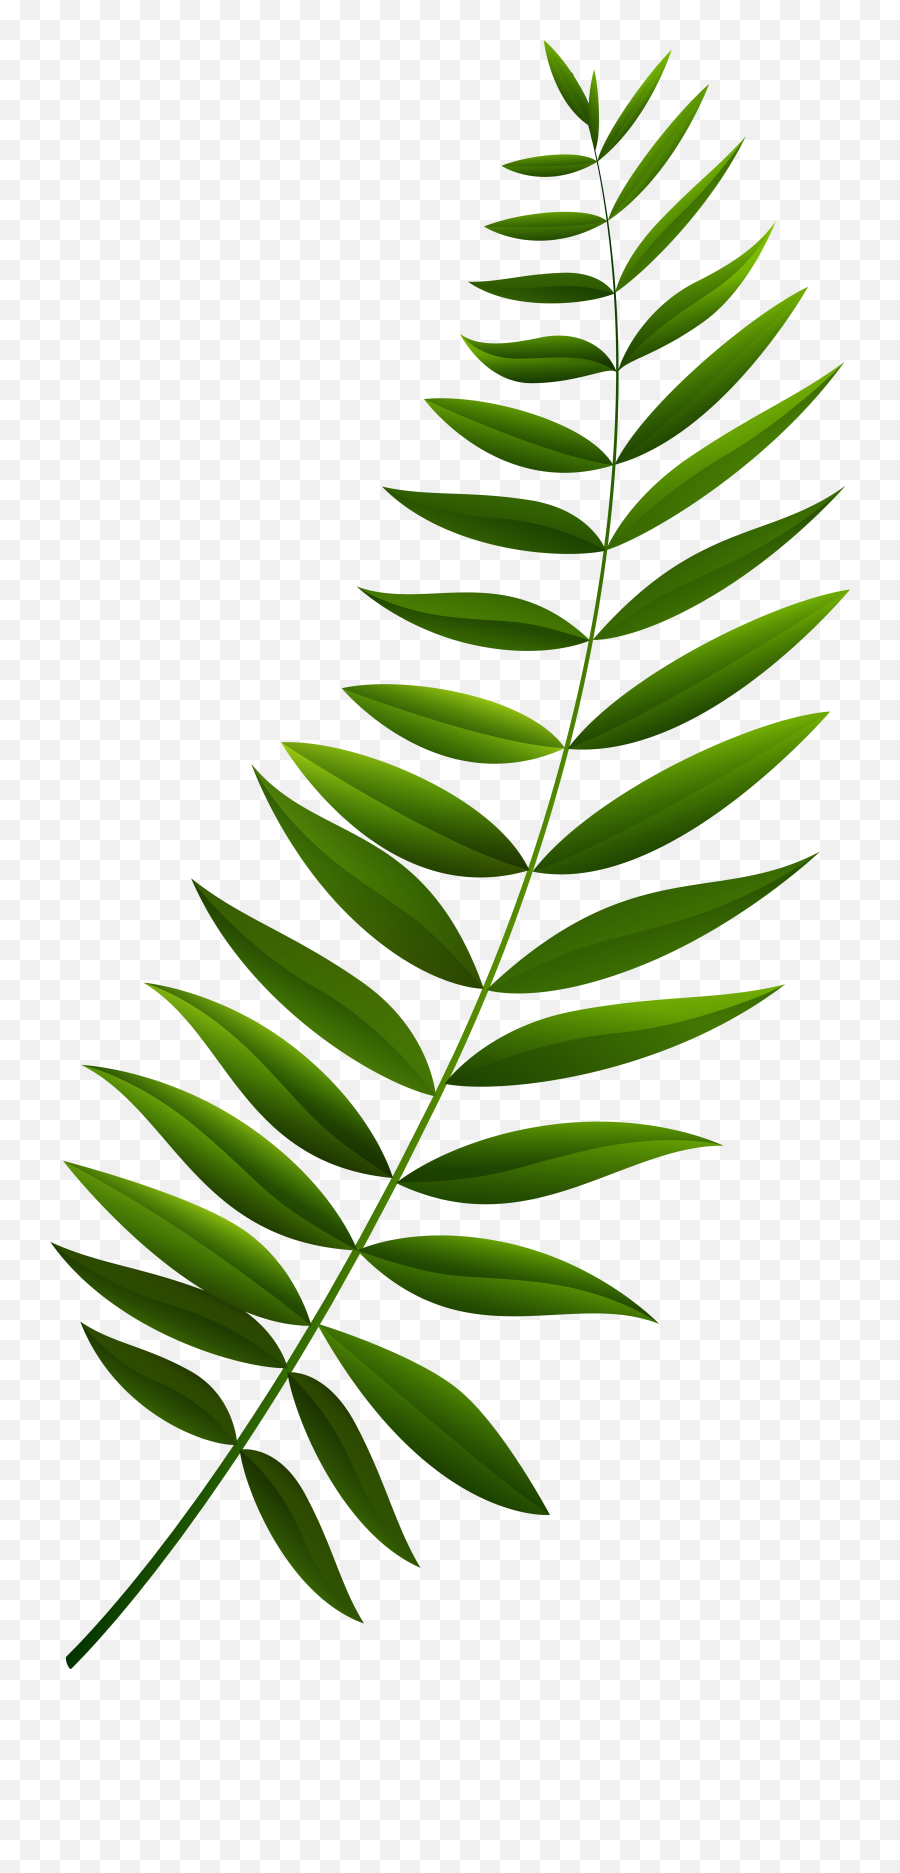 Green Branch Clipart - Png Download Full Size Clipart Green Branch Transparent Emoji,Branch Emoji